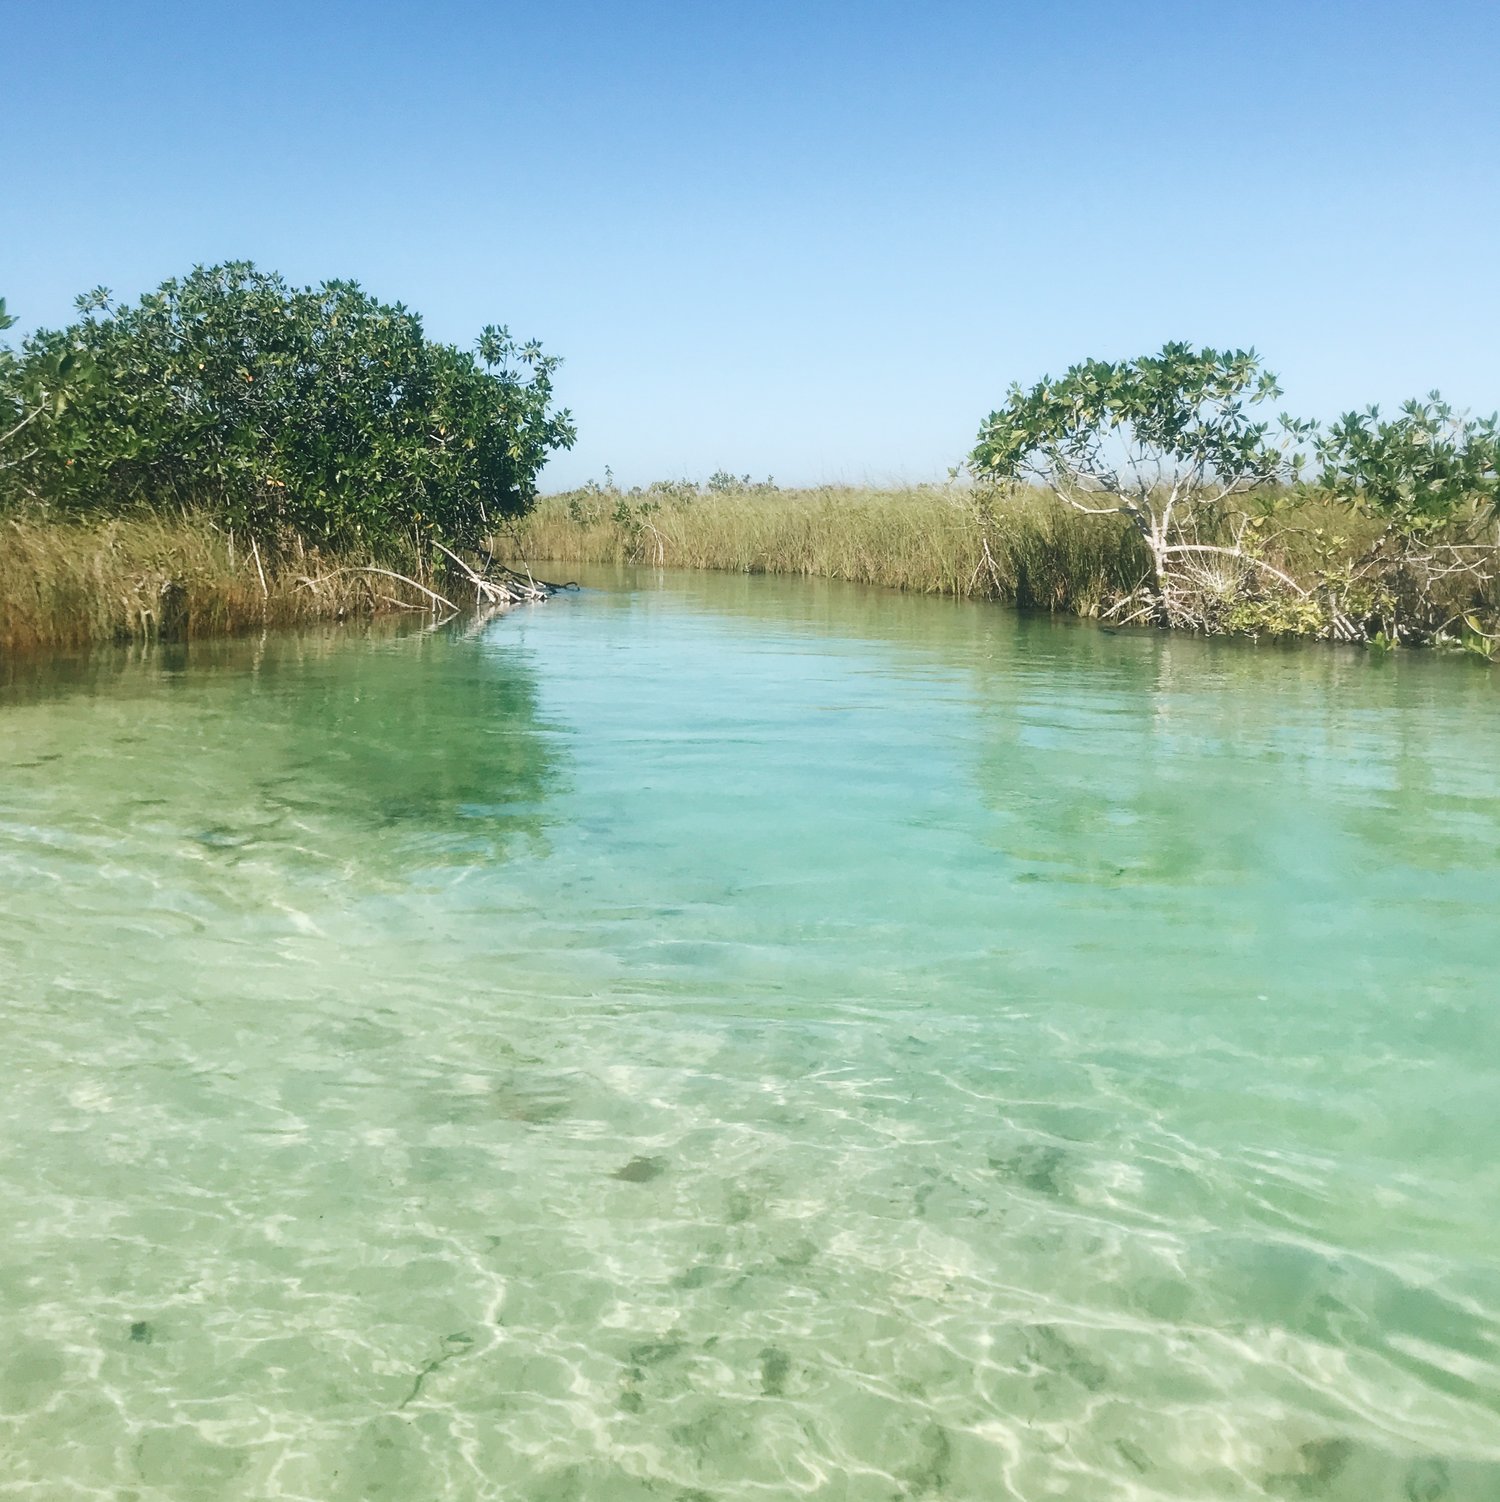 Float through the Mangroves of Sian Ka'an on this Lazy River Adventure